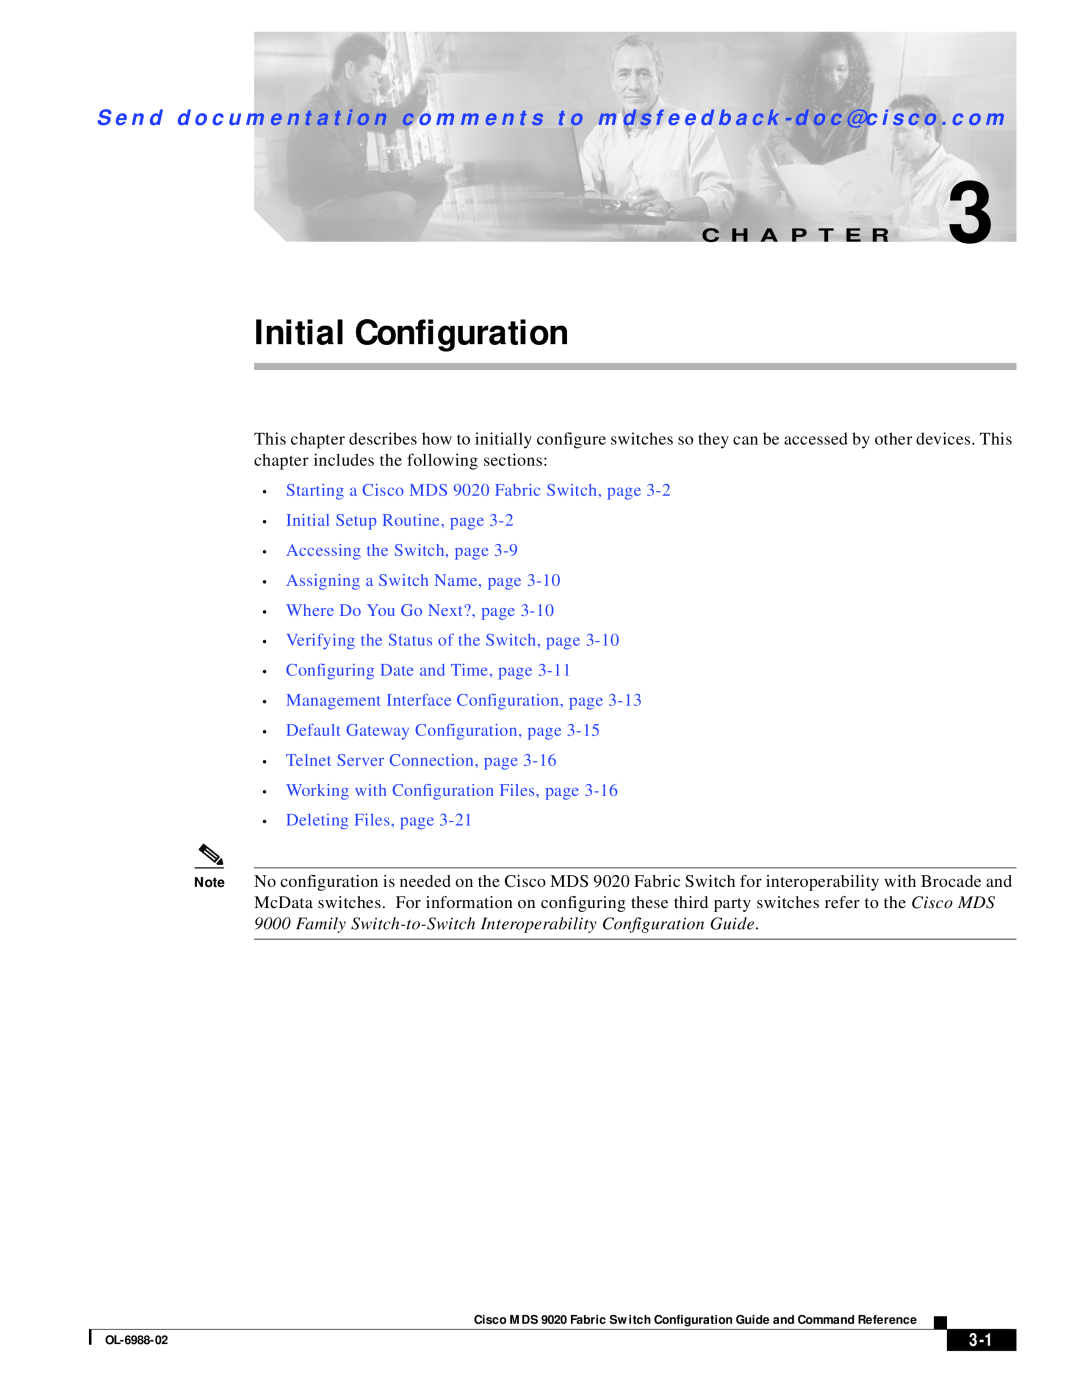 Cisco Systems MDS 9020 manual Initial Configuration, C H A P T E R 